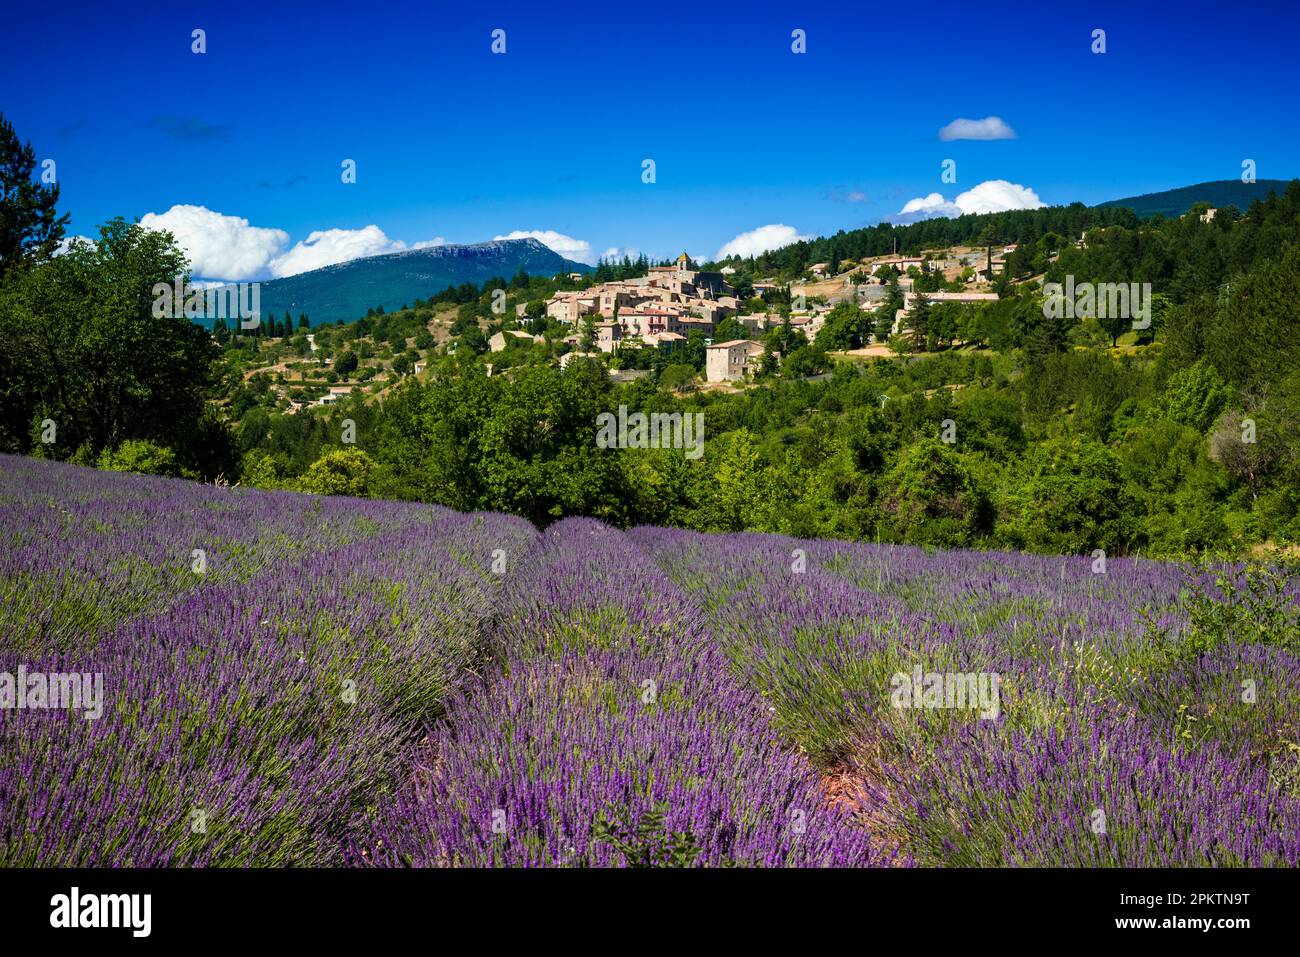 Lavender field in front of the village of Aurel Stock Photo